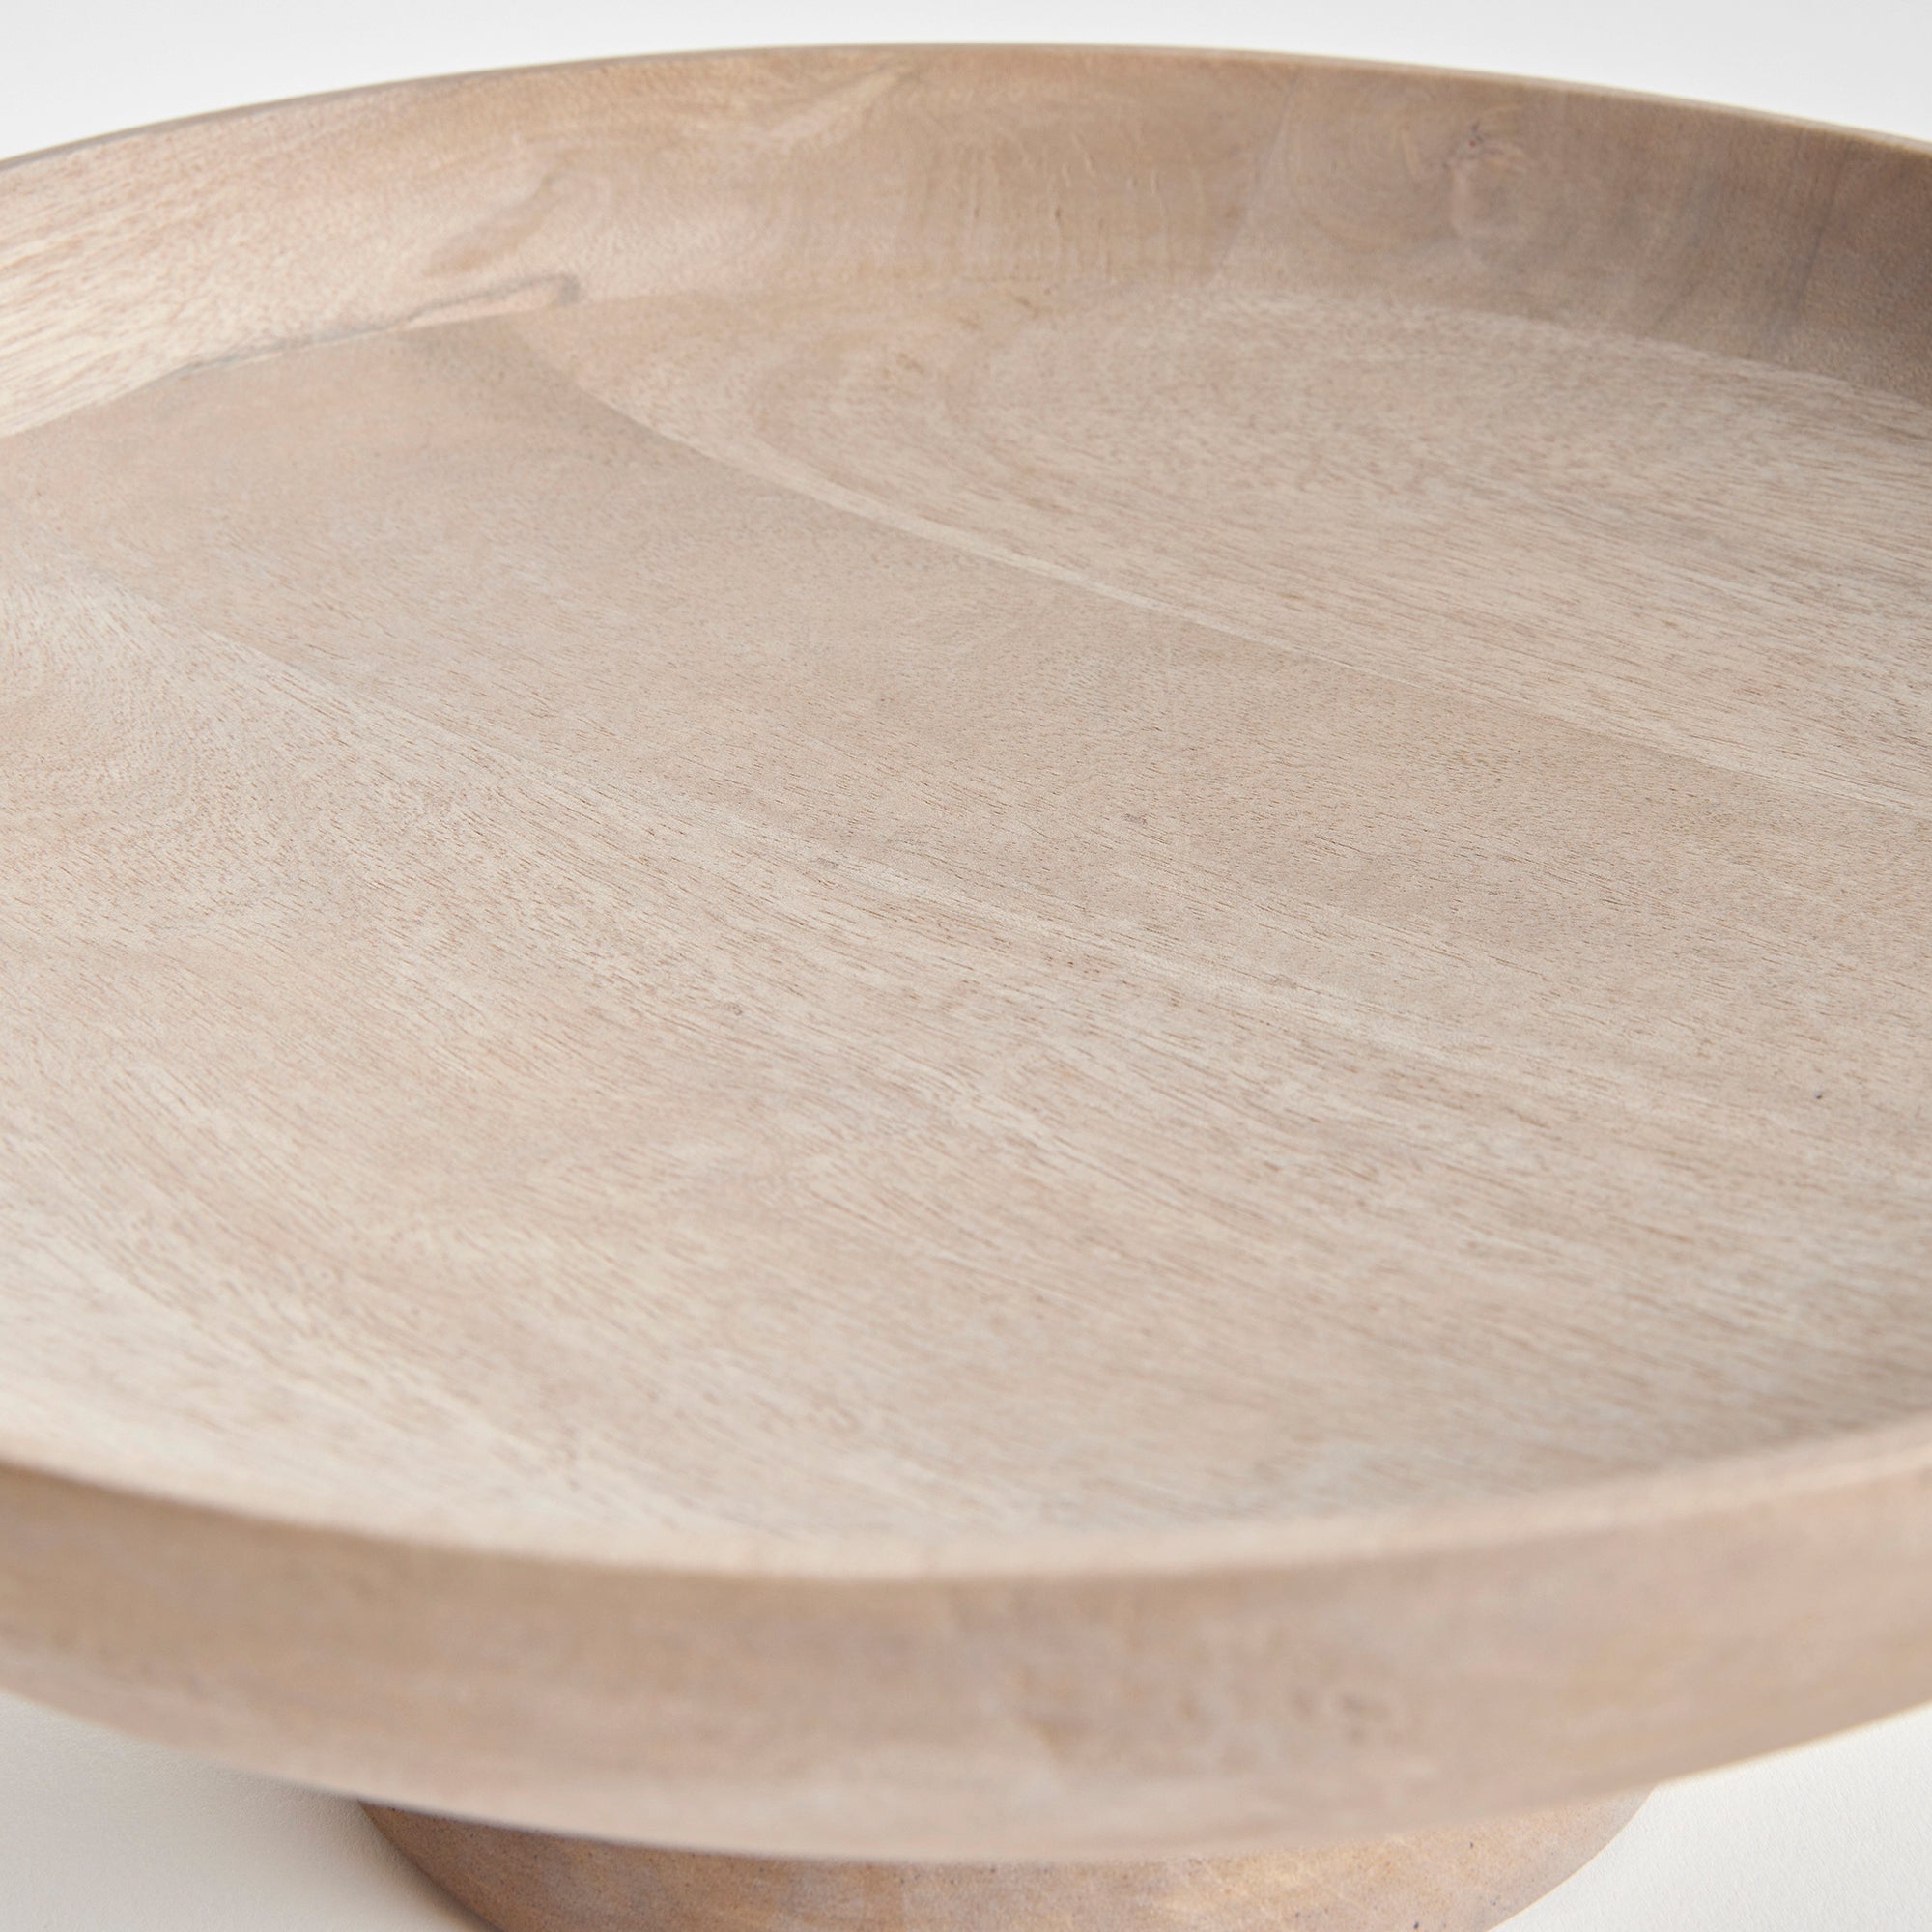 Contemporary and uniquely designed, this footed bowl is made of mango wood. Makes a beautiful serving bowl for dry foods, as well as a gorgeous centerpiece all on its own. Amethyst Home provides interior design, new construction, custom furniture, and area rugs in the Los Angeles metro area.